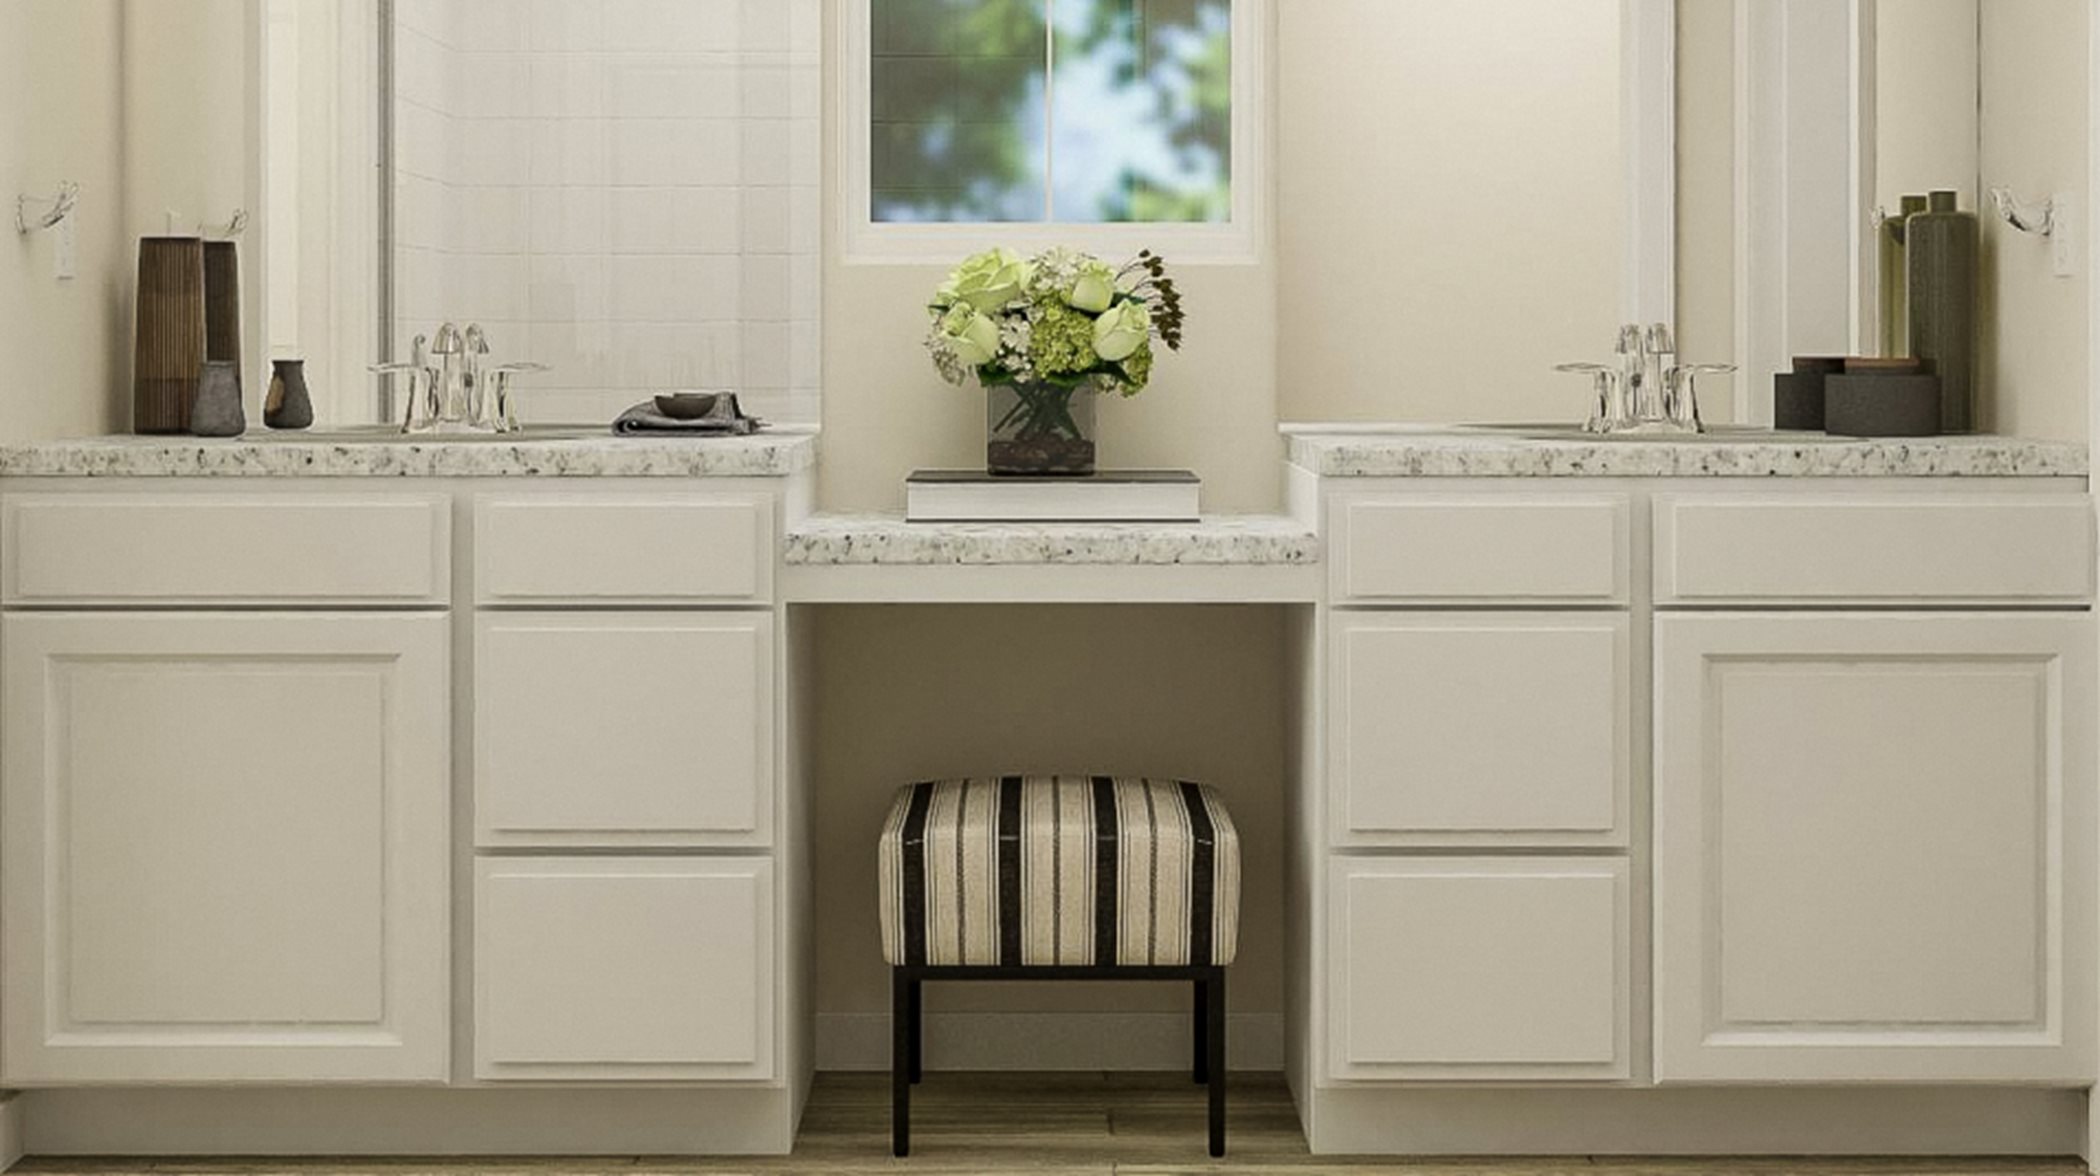 Brighton Crossings The Pioneer Collection Snowmass Kitchen Dual Sinks